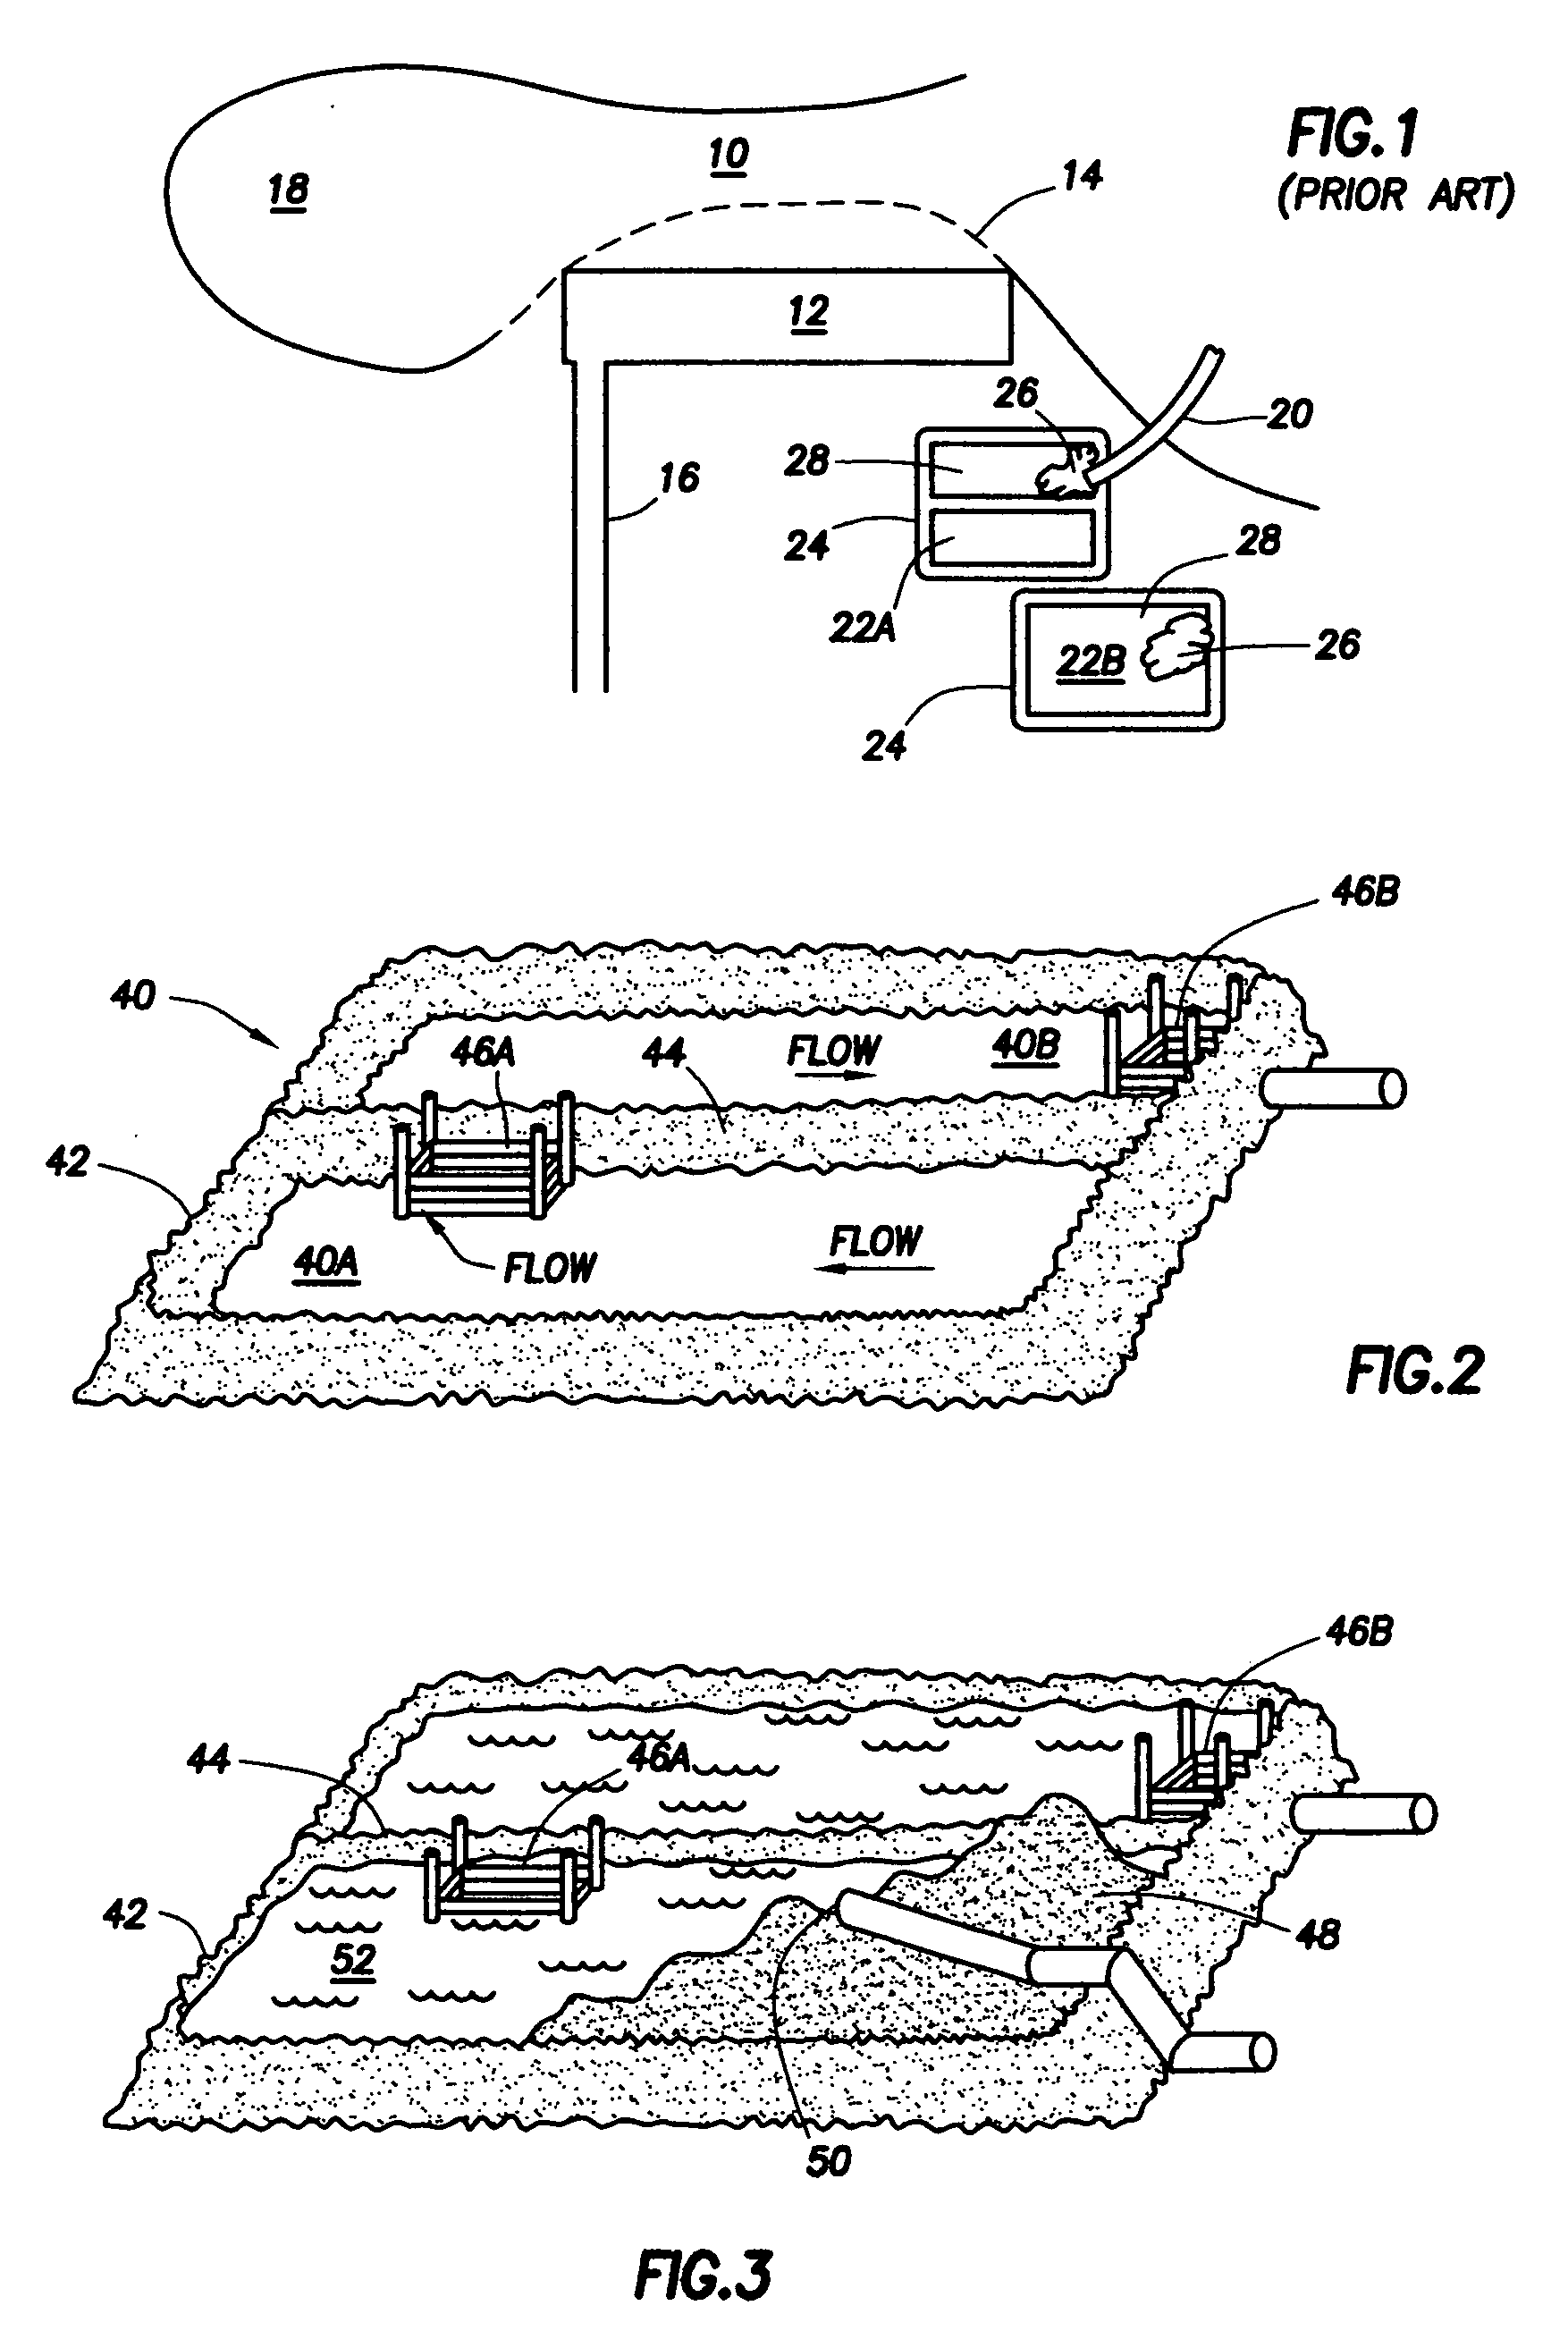 Method for reclaiming hydraulically dredged material